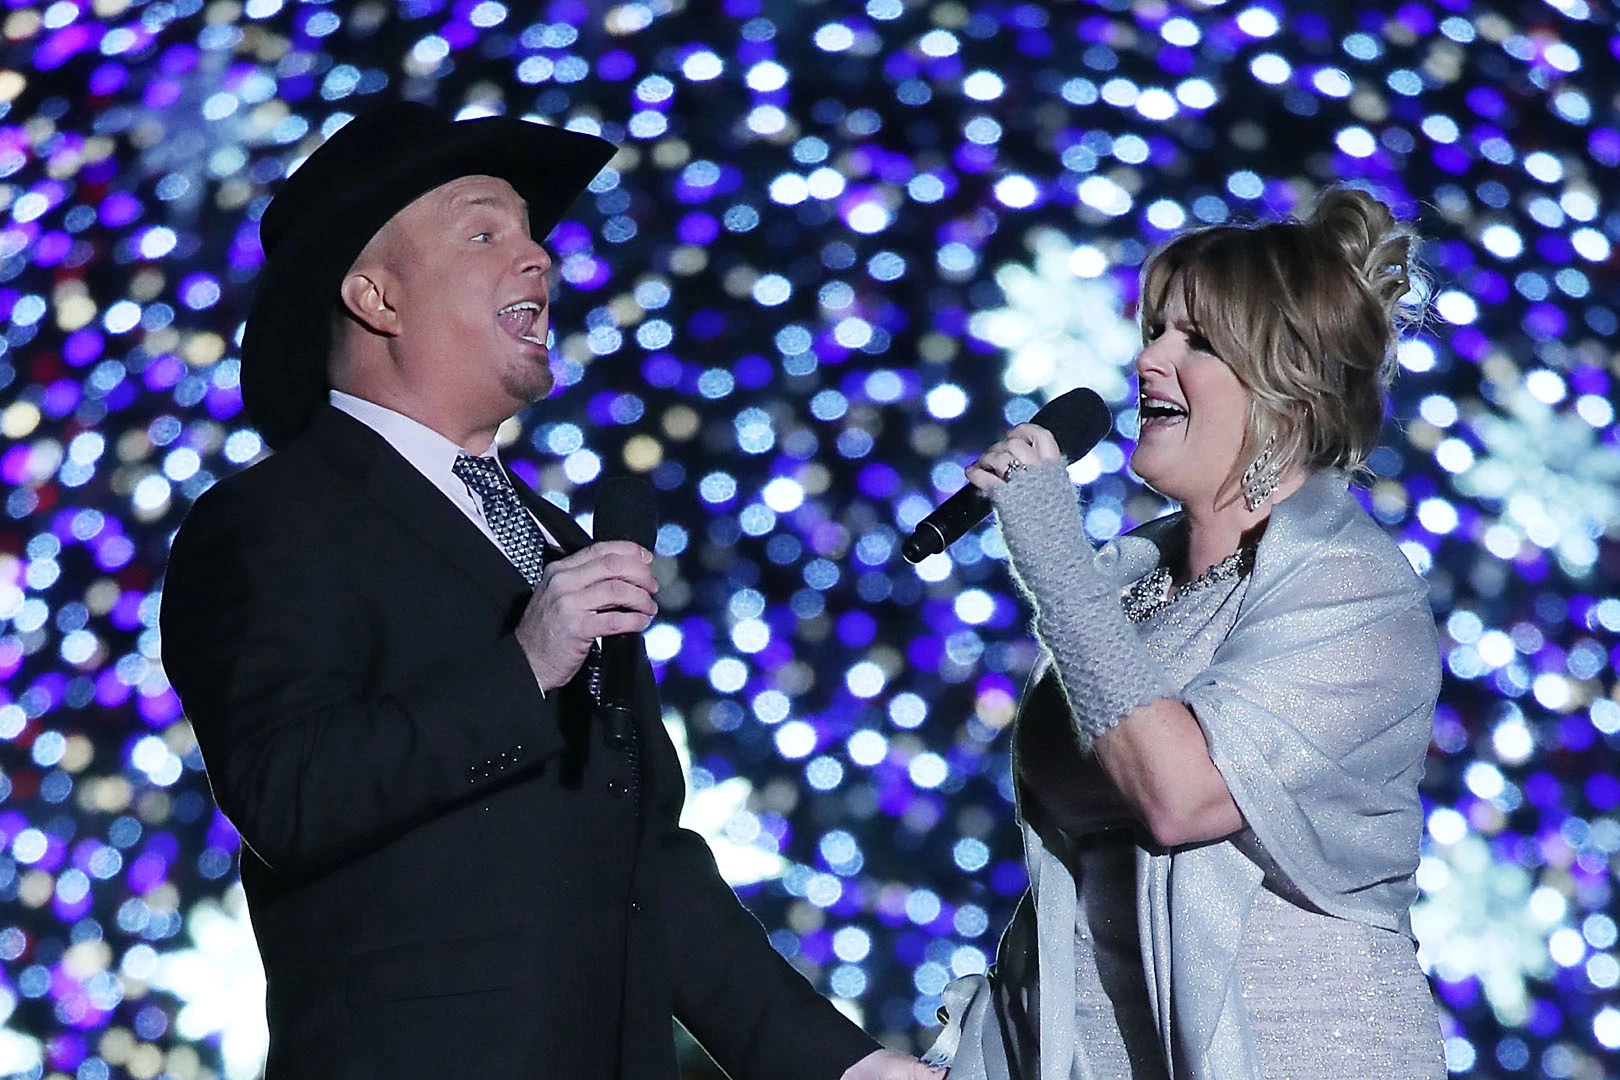 Country music stars Garth Brooks and Trisha Yearwood light the Christmas tree in New York's Rockefeller Center in 2016.